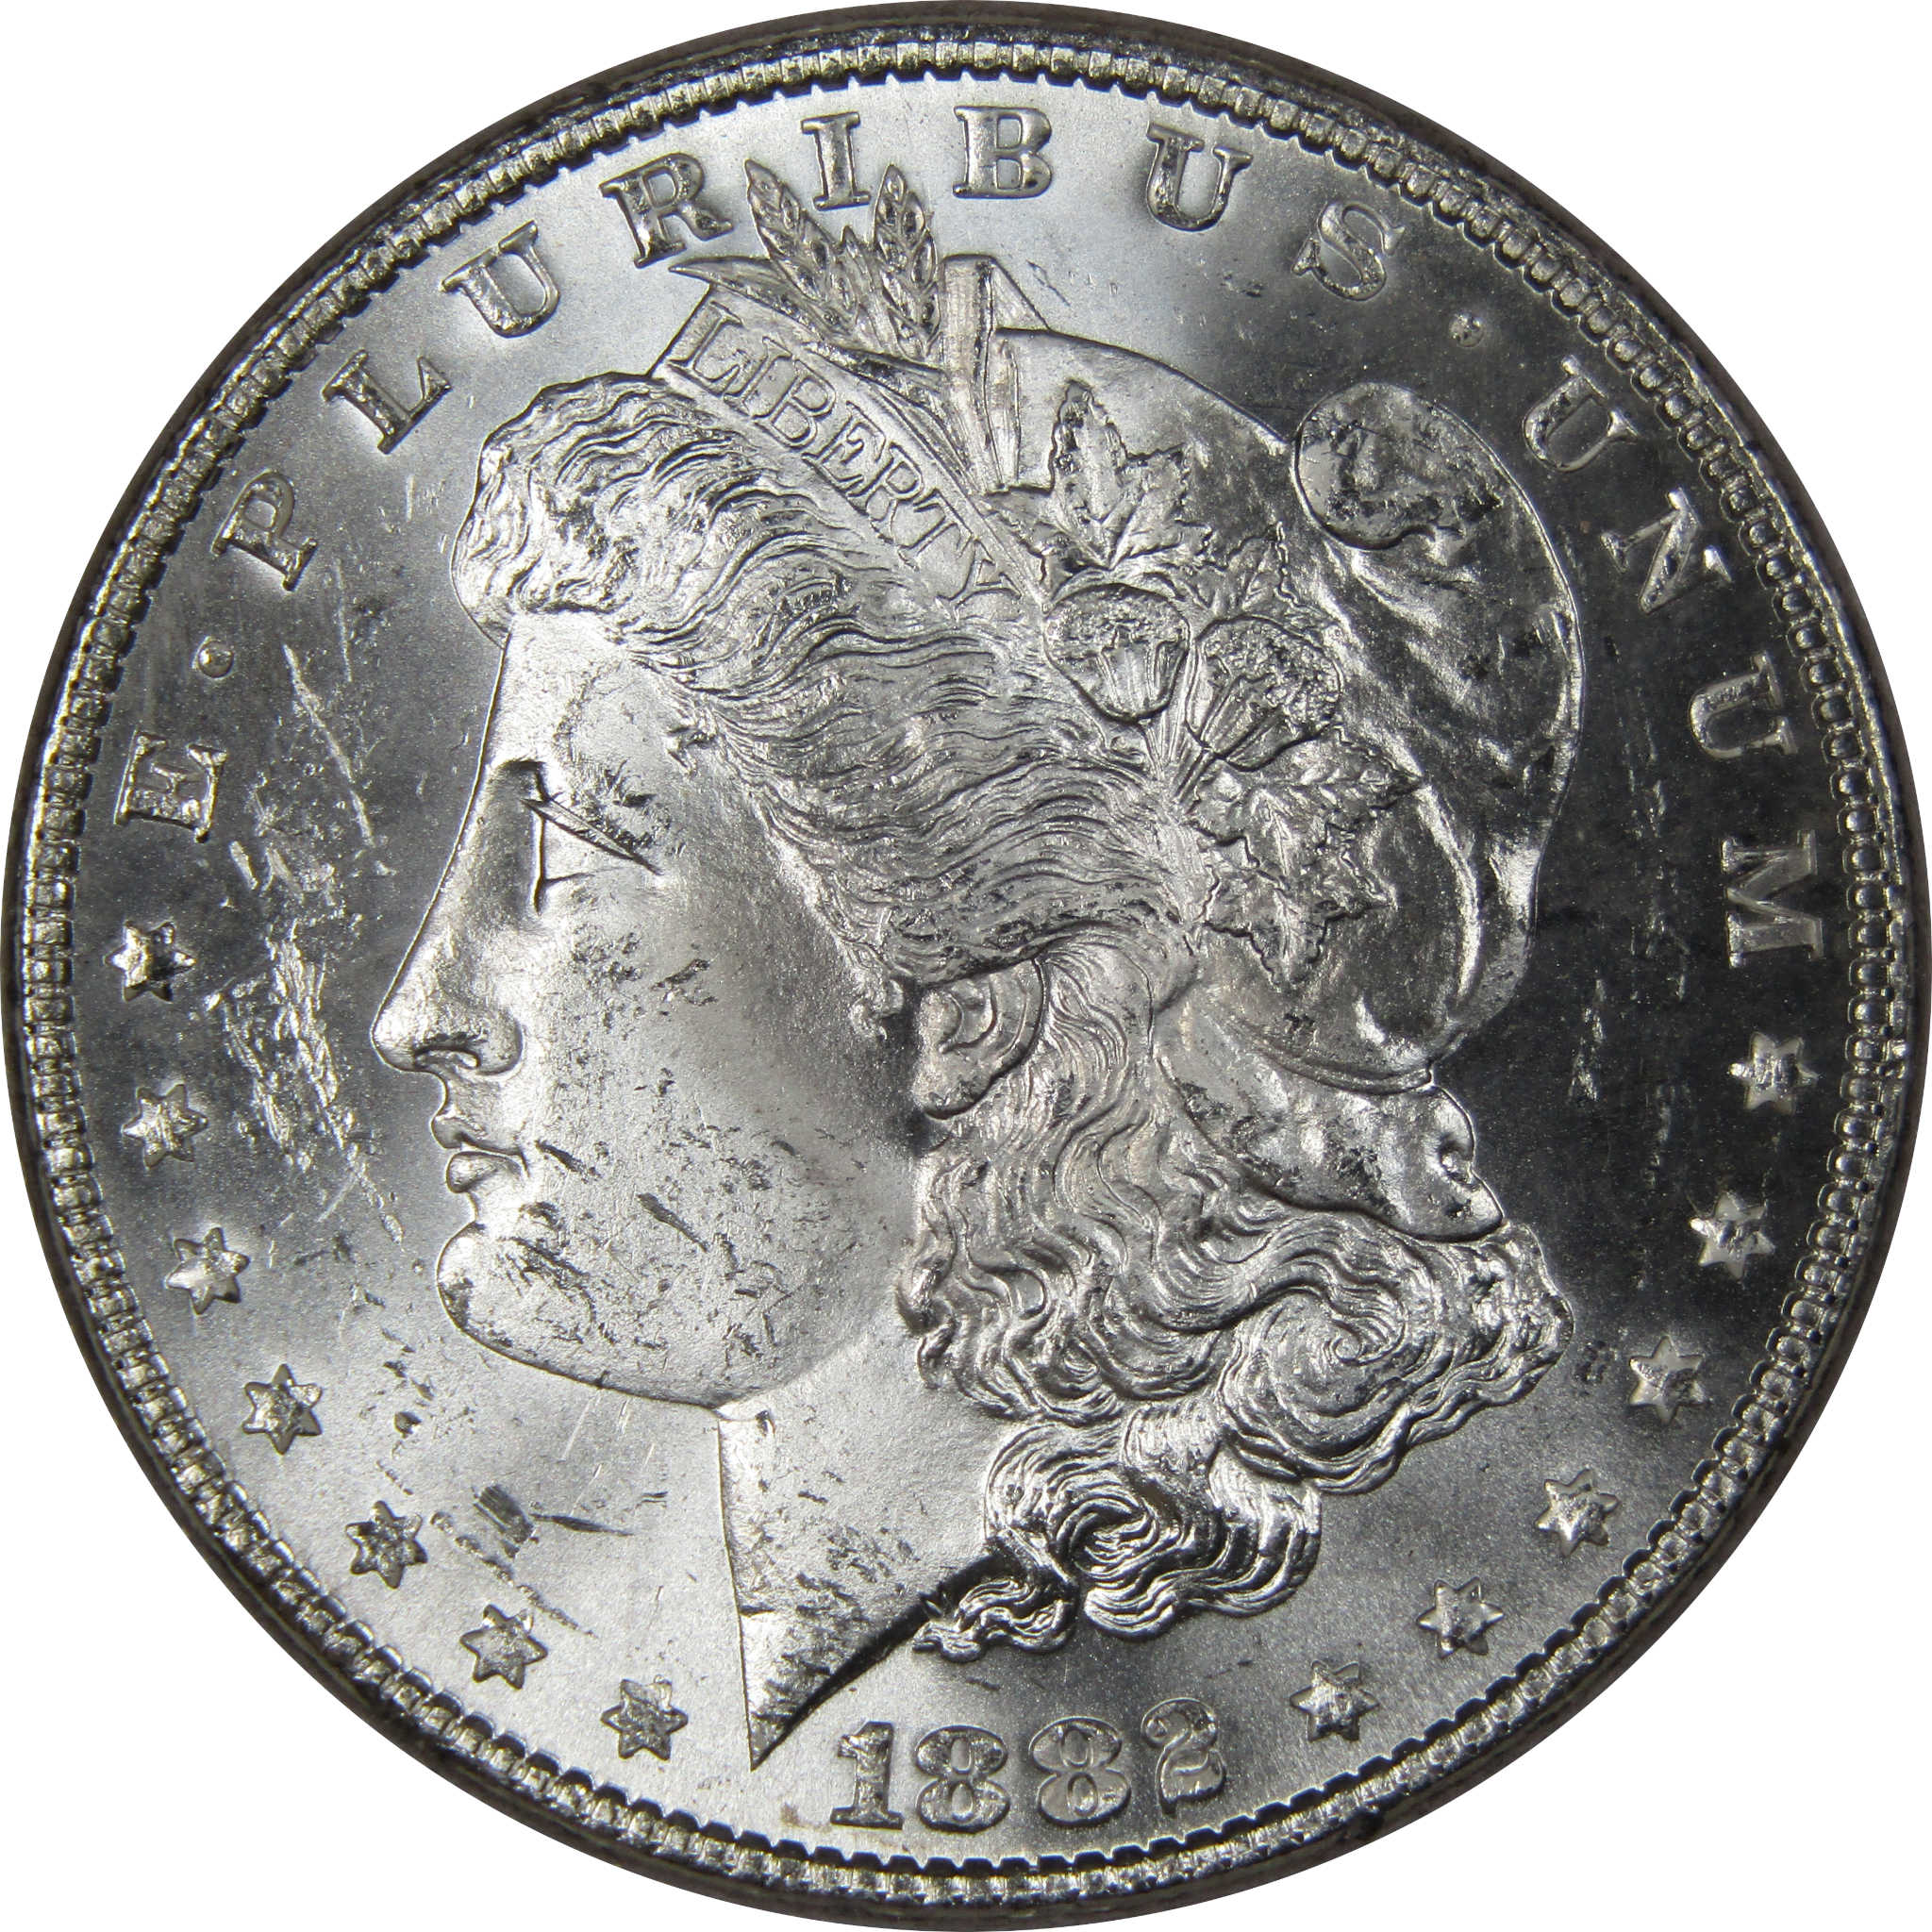 1882 Morgan Dollar BU Uncirculated Mint State 90% Silver SKU:IPC9702 - Morgan coin - Morgan silver dollar - Morgan silver dollar for sale - Profile Coins &amp; Collectibles